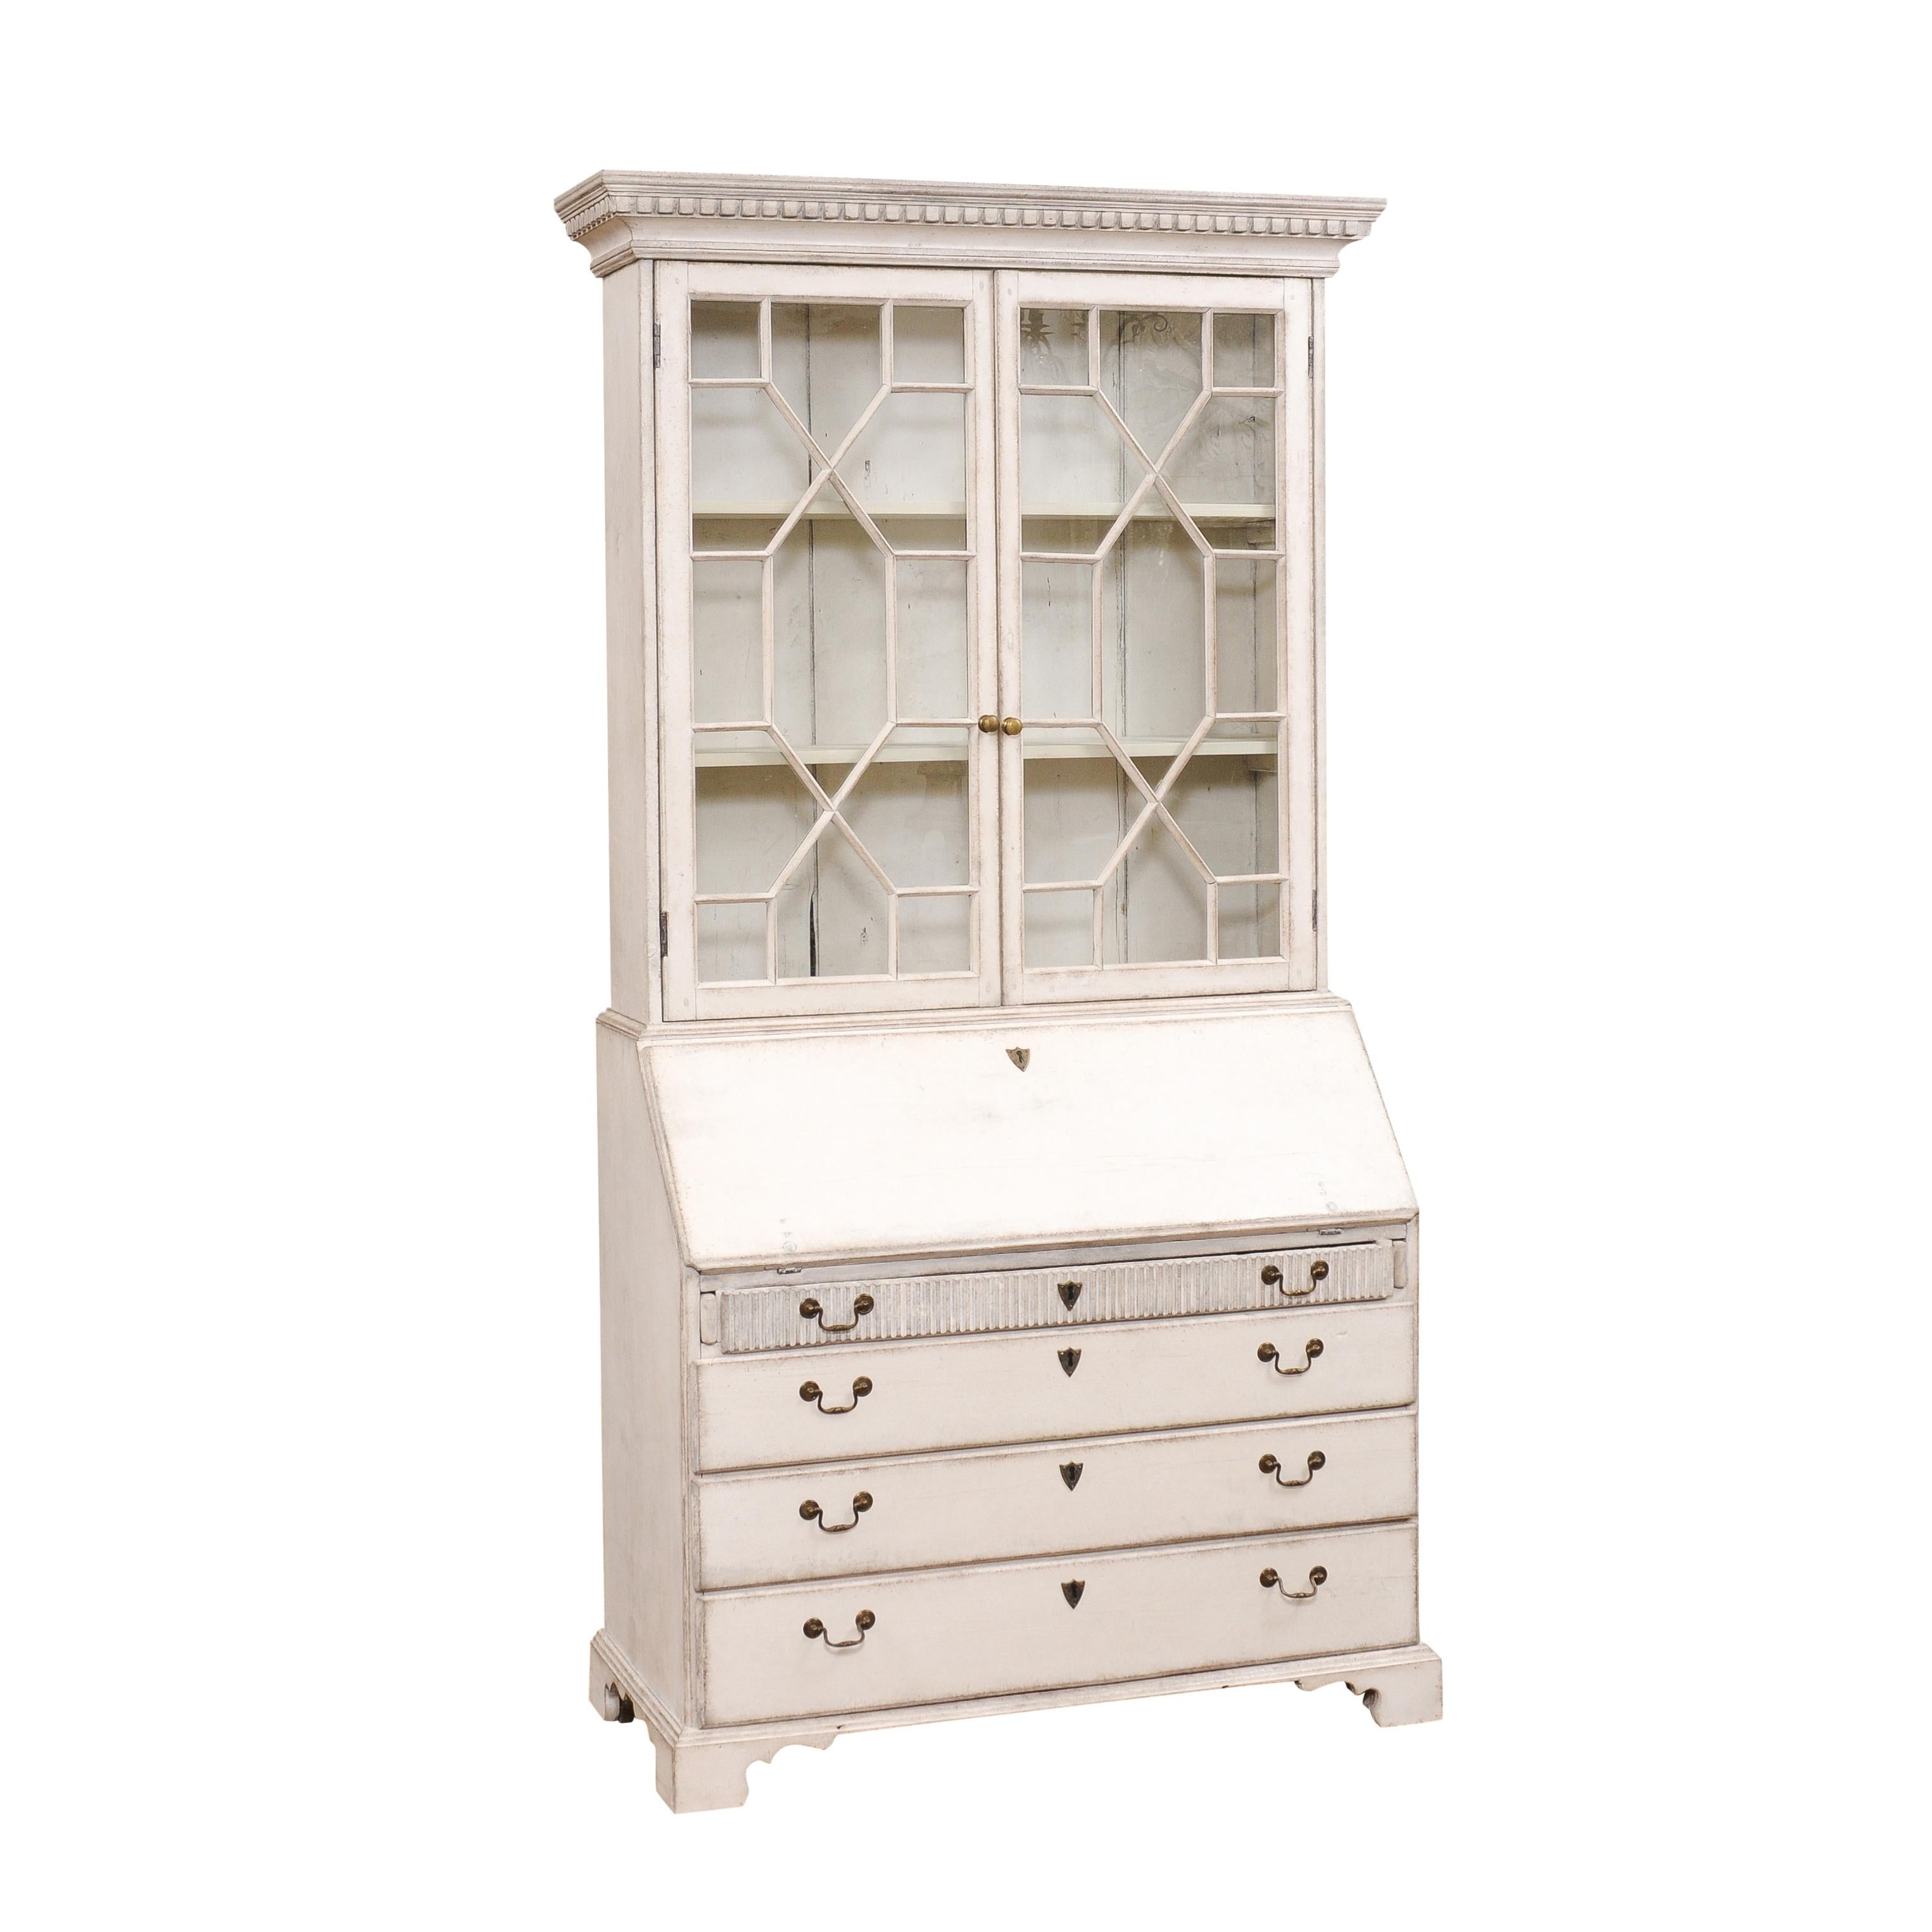 A European painted wood tall two-part secretary circa 1790 with glass doors, carved dentil molding, slant-front desk and four graduating drawers. Enhance your home decor with this exquisite European painted wood tall two-part secretary from the late